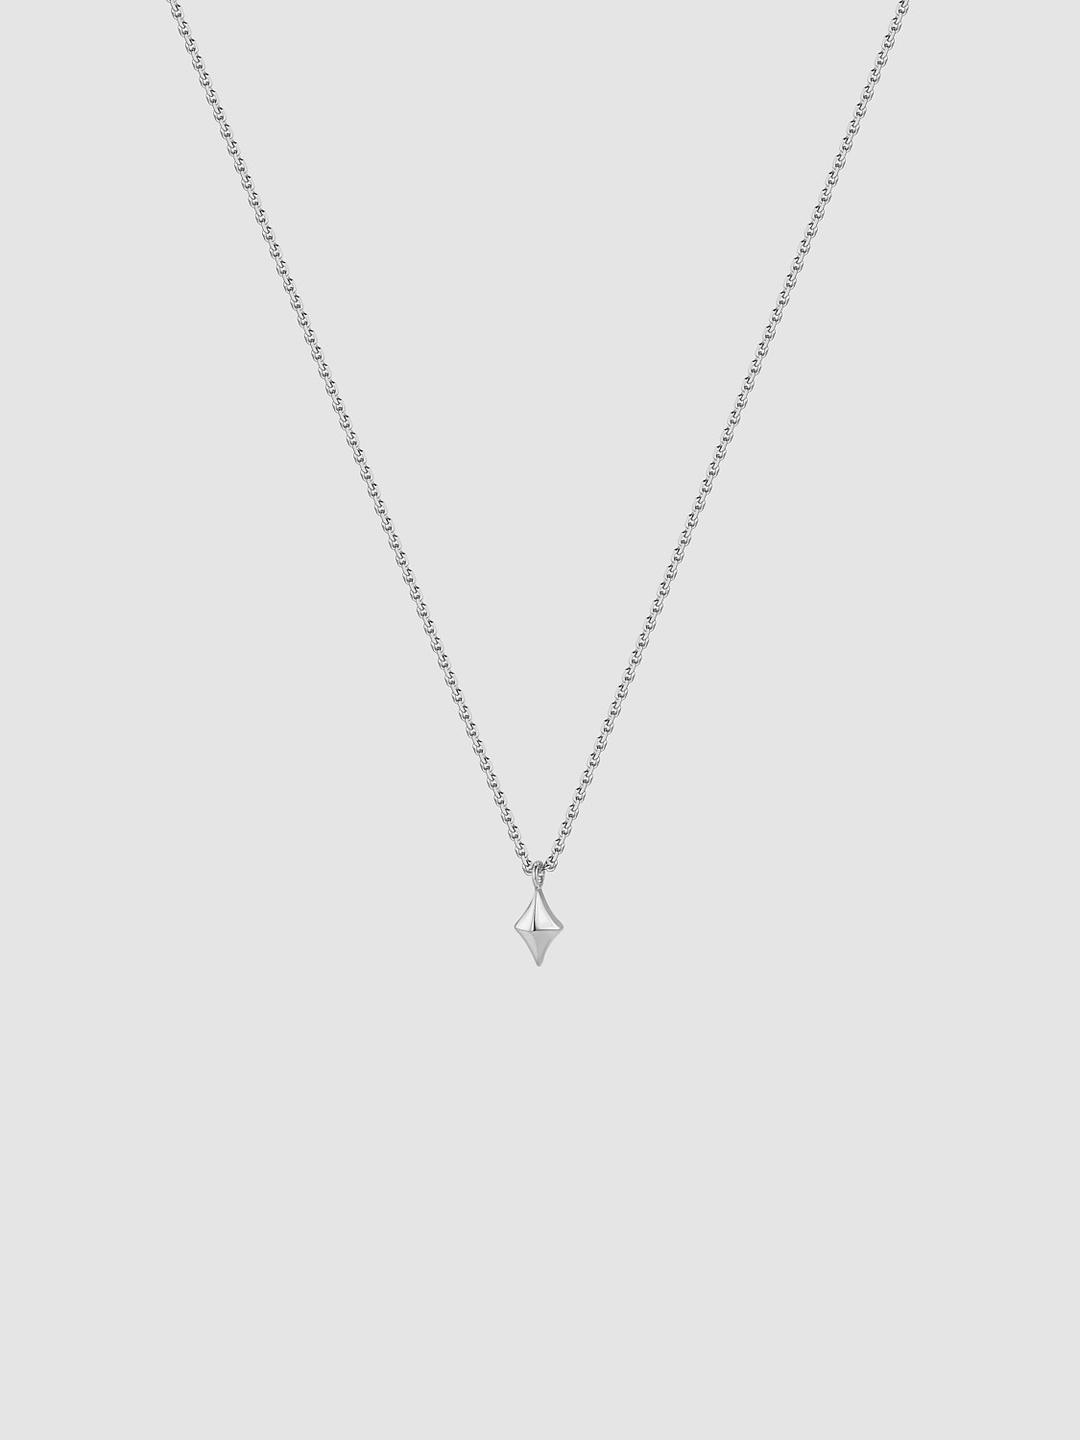 Teeny Sparkle Necklace White Gold